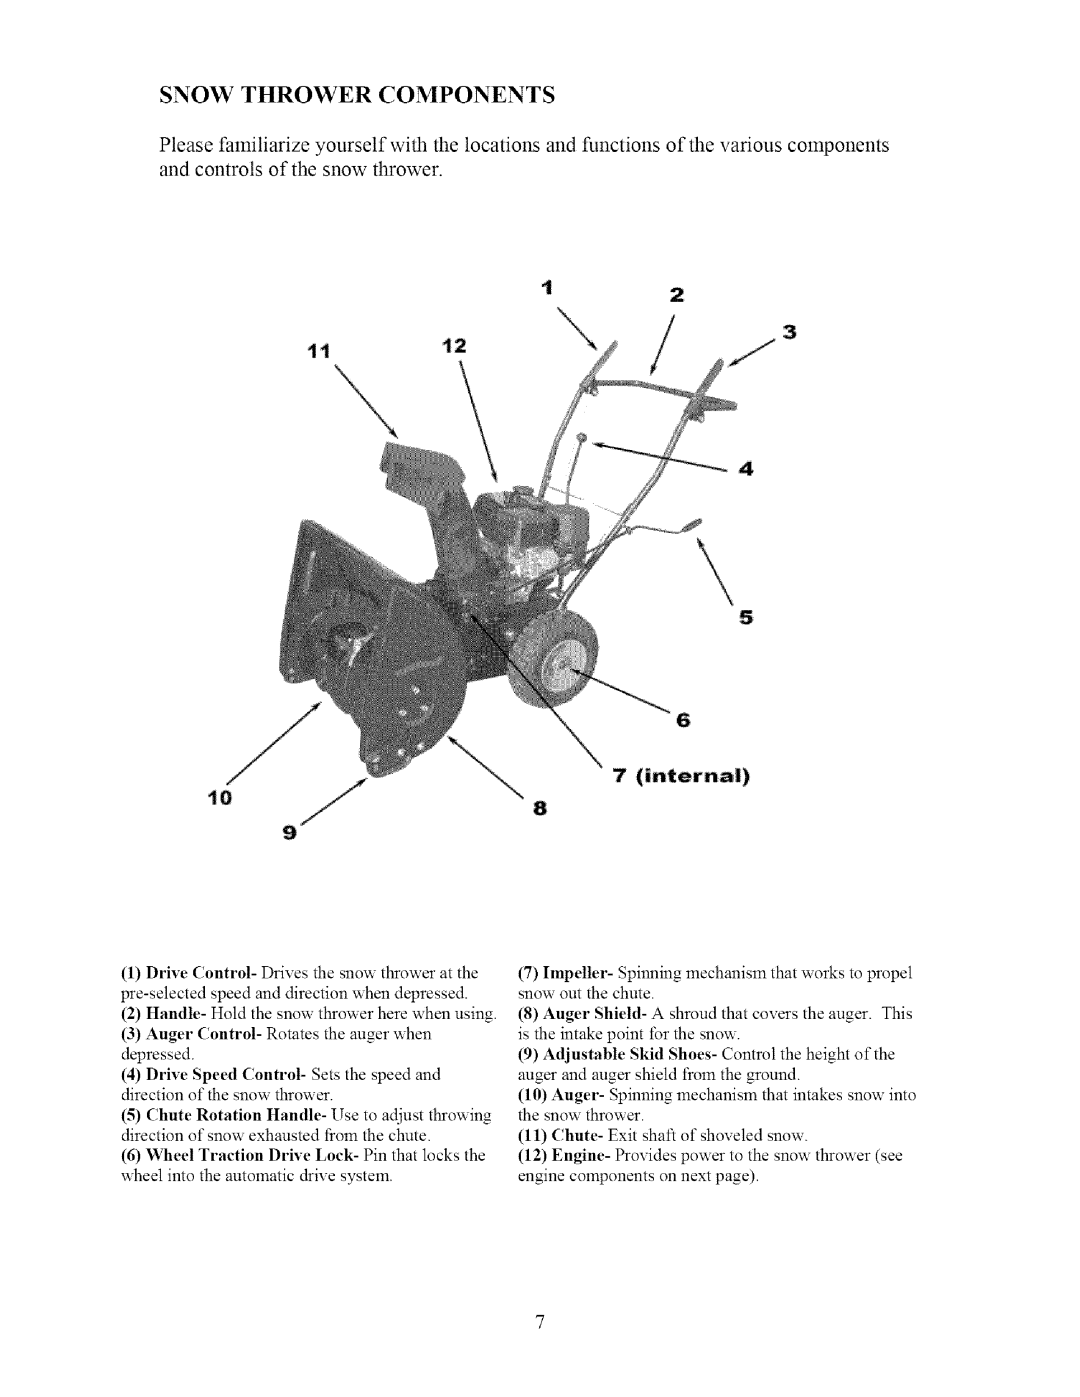 Sears 270-3250 owner manual Snow Thrower Components 